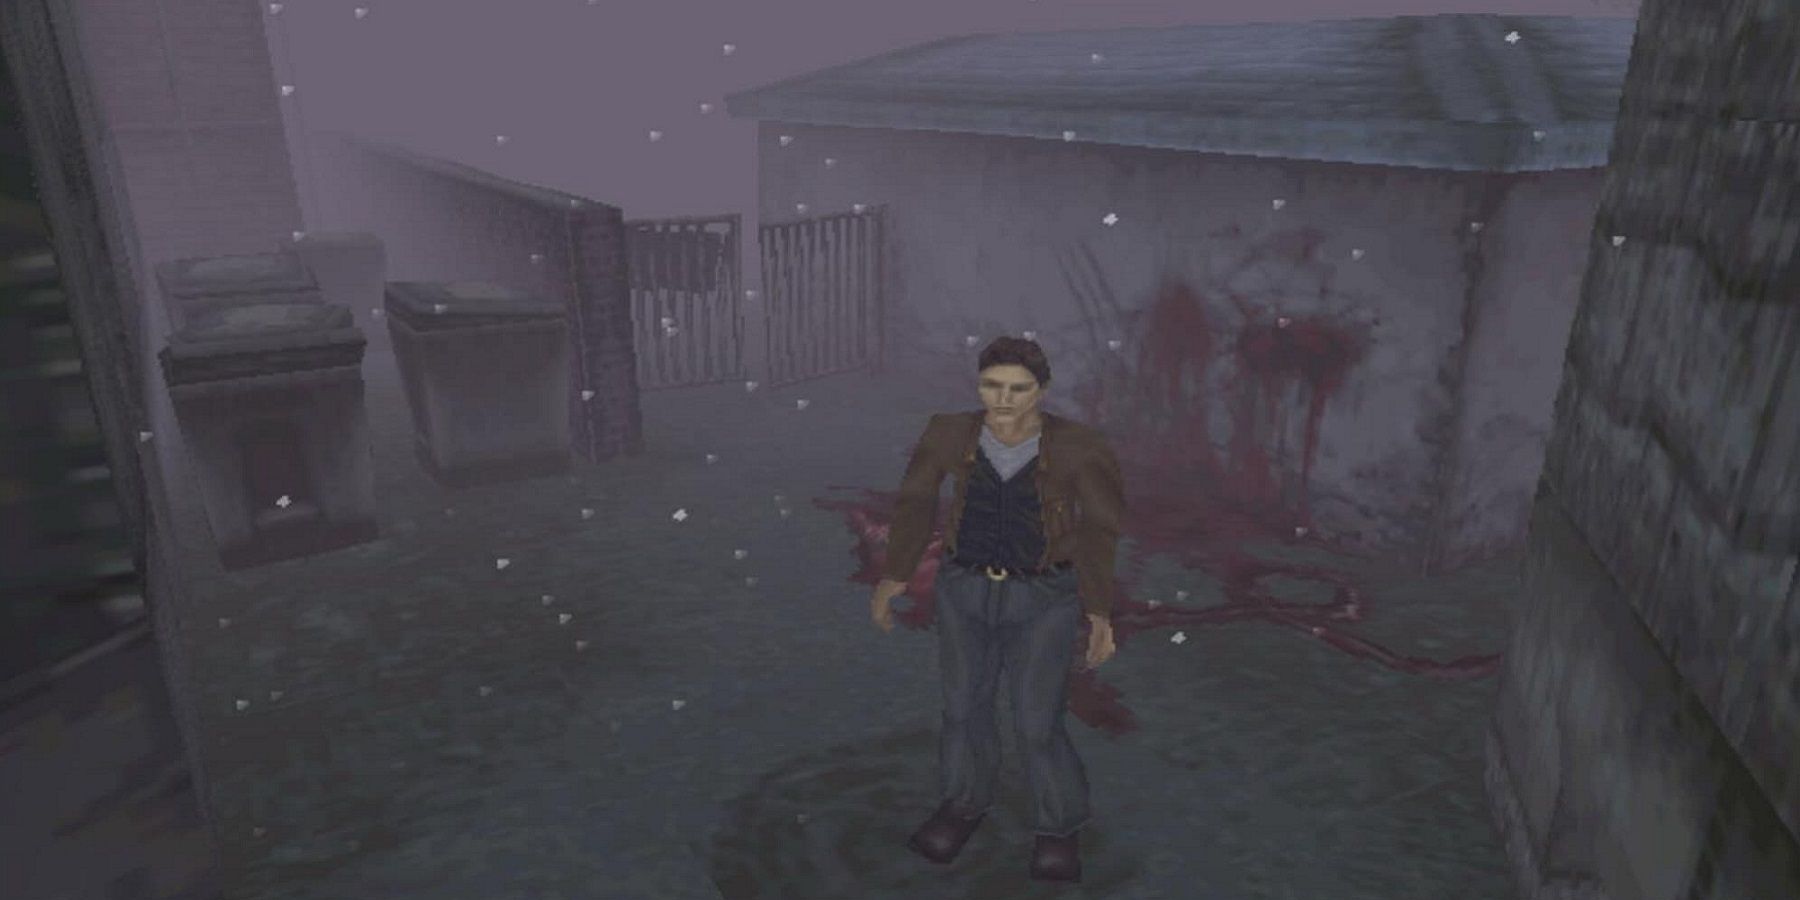 Screenshot from Silent Hill showing Harry Mason in an alleyway with guts on the wall behind him.